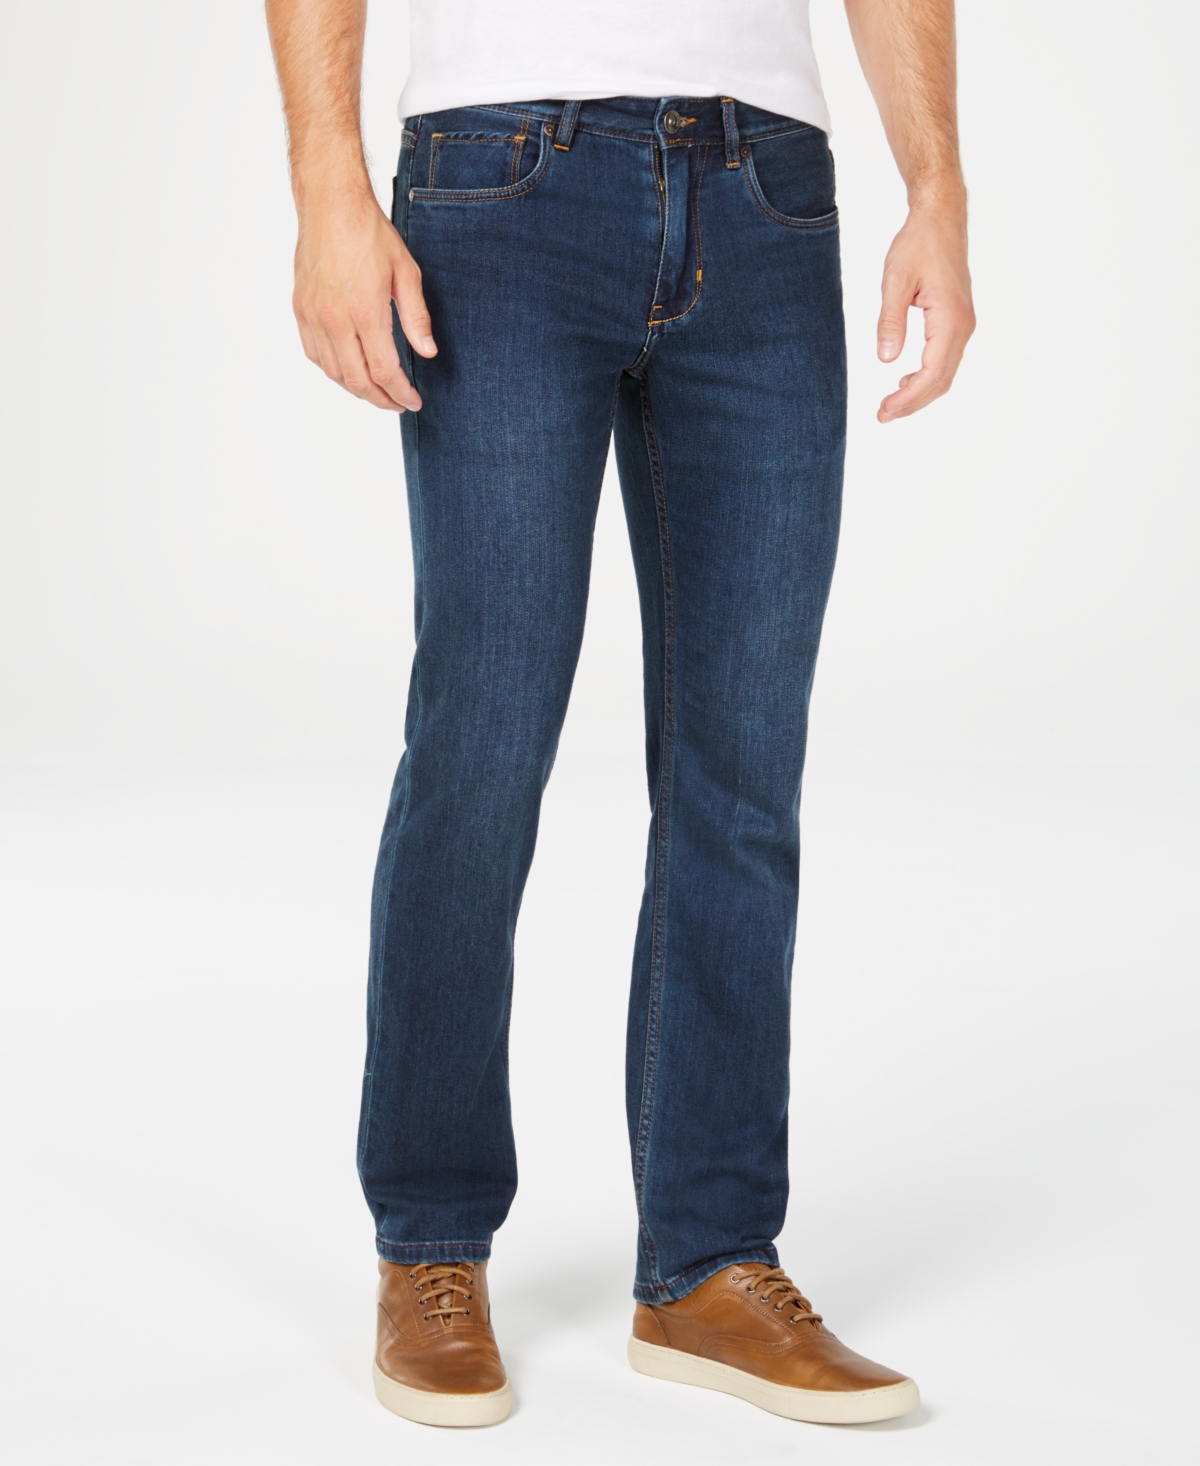 UPC 719260342583 product image for Tommy Bahama Men's Antigua Cove Authentic Fit Jeans | upcitemdb.com